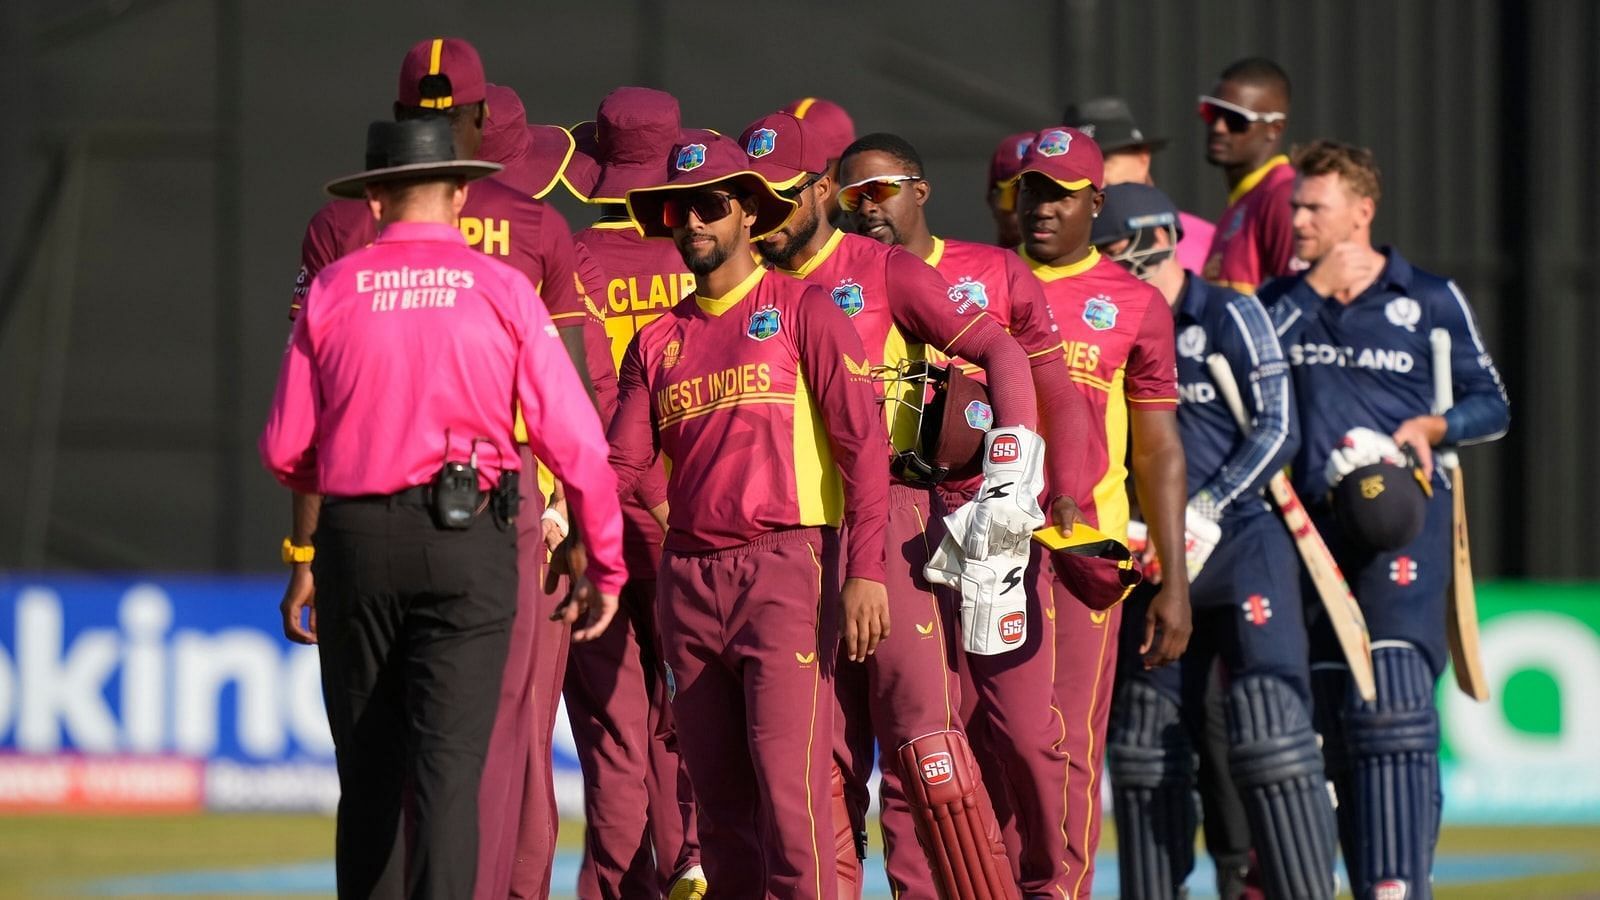 After enduring a tough run in the World Cup Qualifiers in Zimbabwe, West Indies will be looking to rebuild for the future